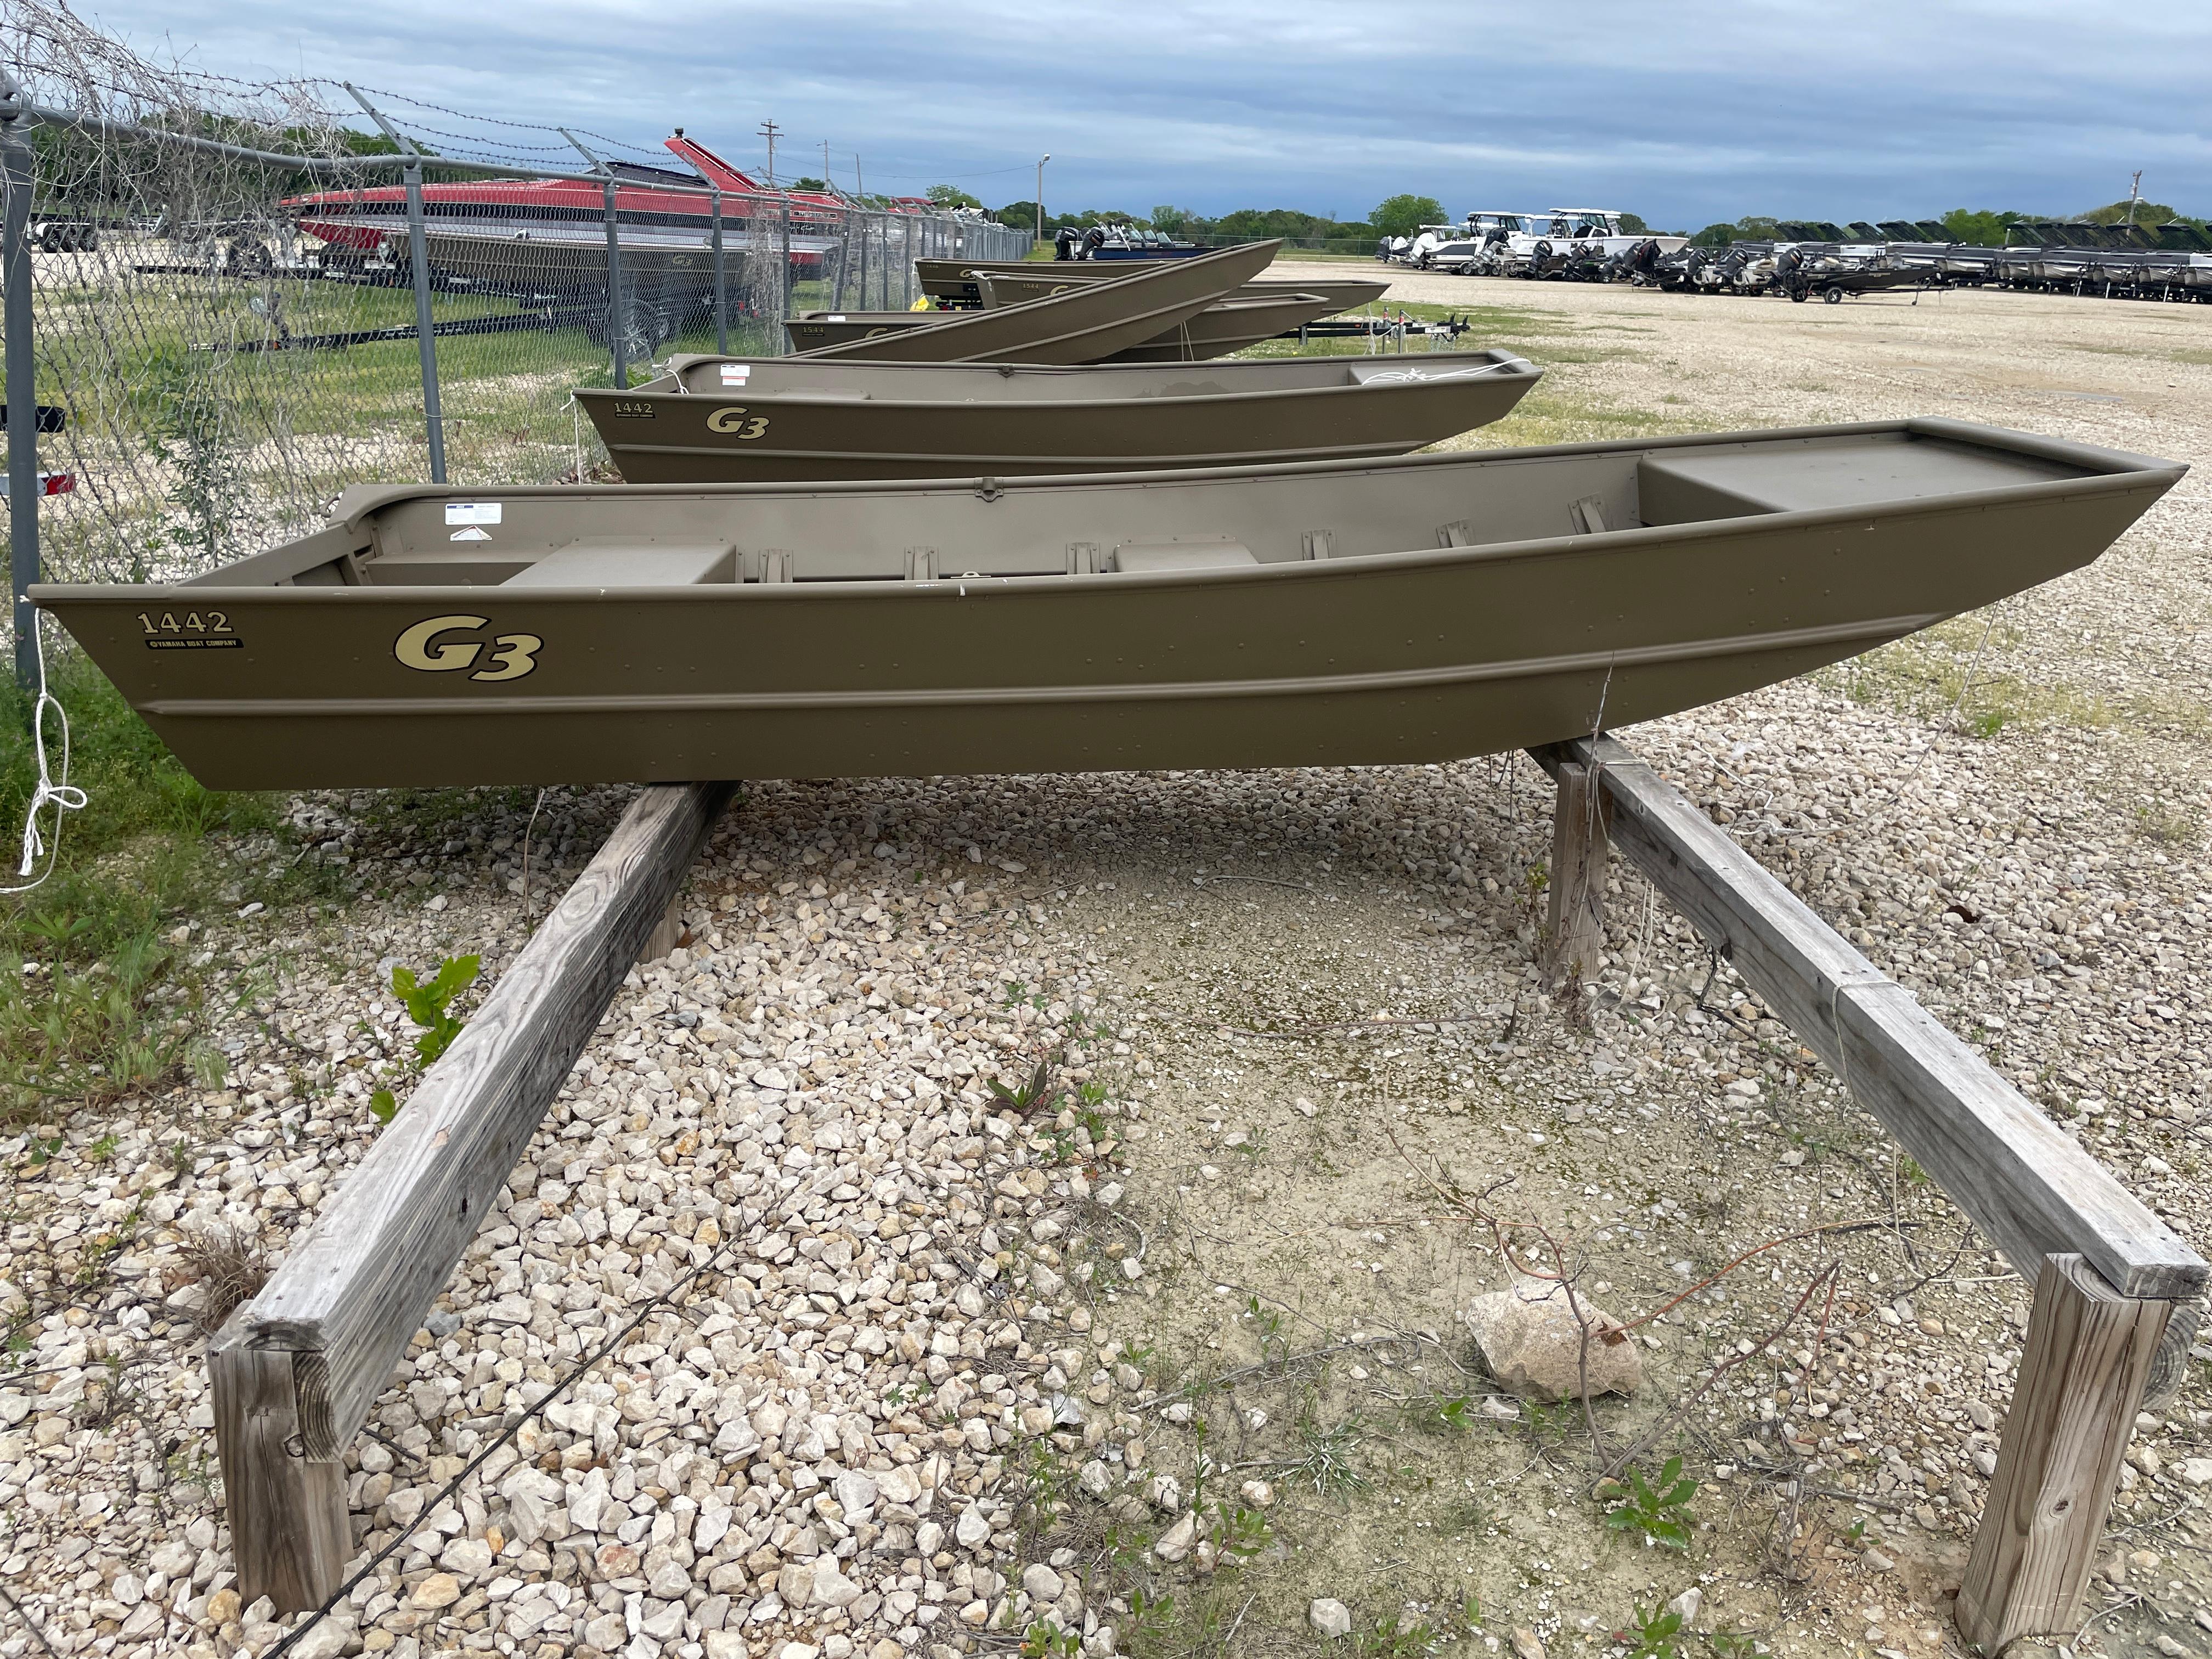 New G3 Boats Gator Tough Jon Models For Sale in North East, MD